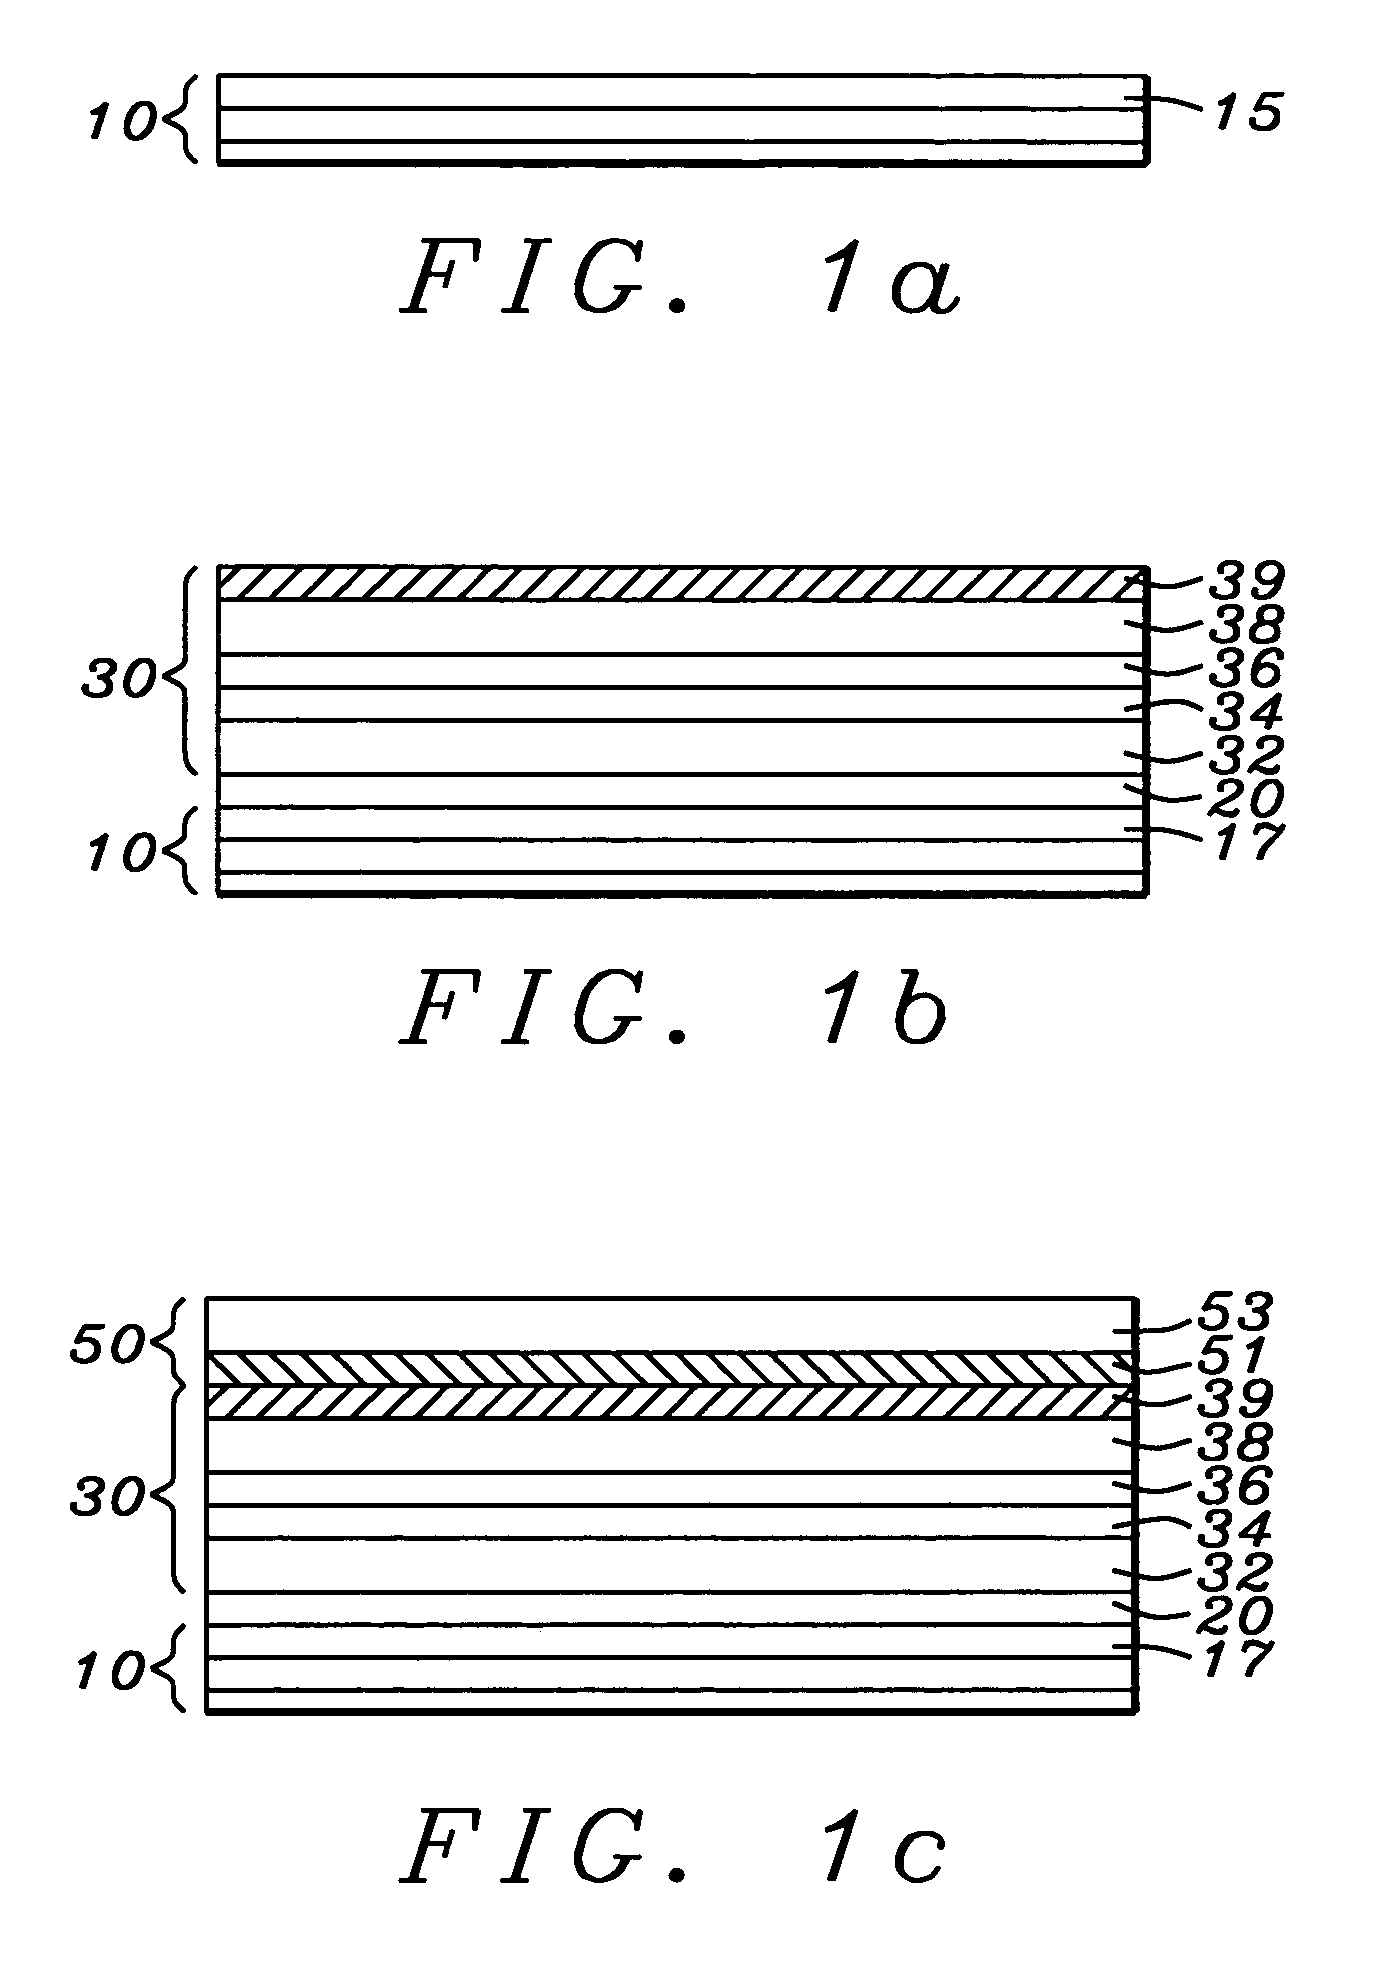 Oxidation structure/method to fabricate a high-performance magnetic tunneling junction MRAM